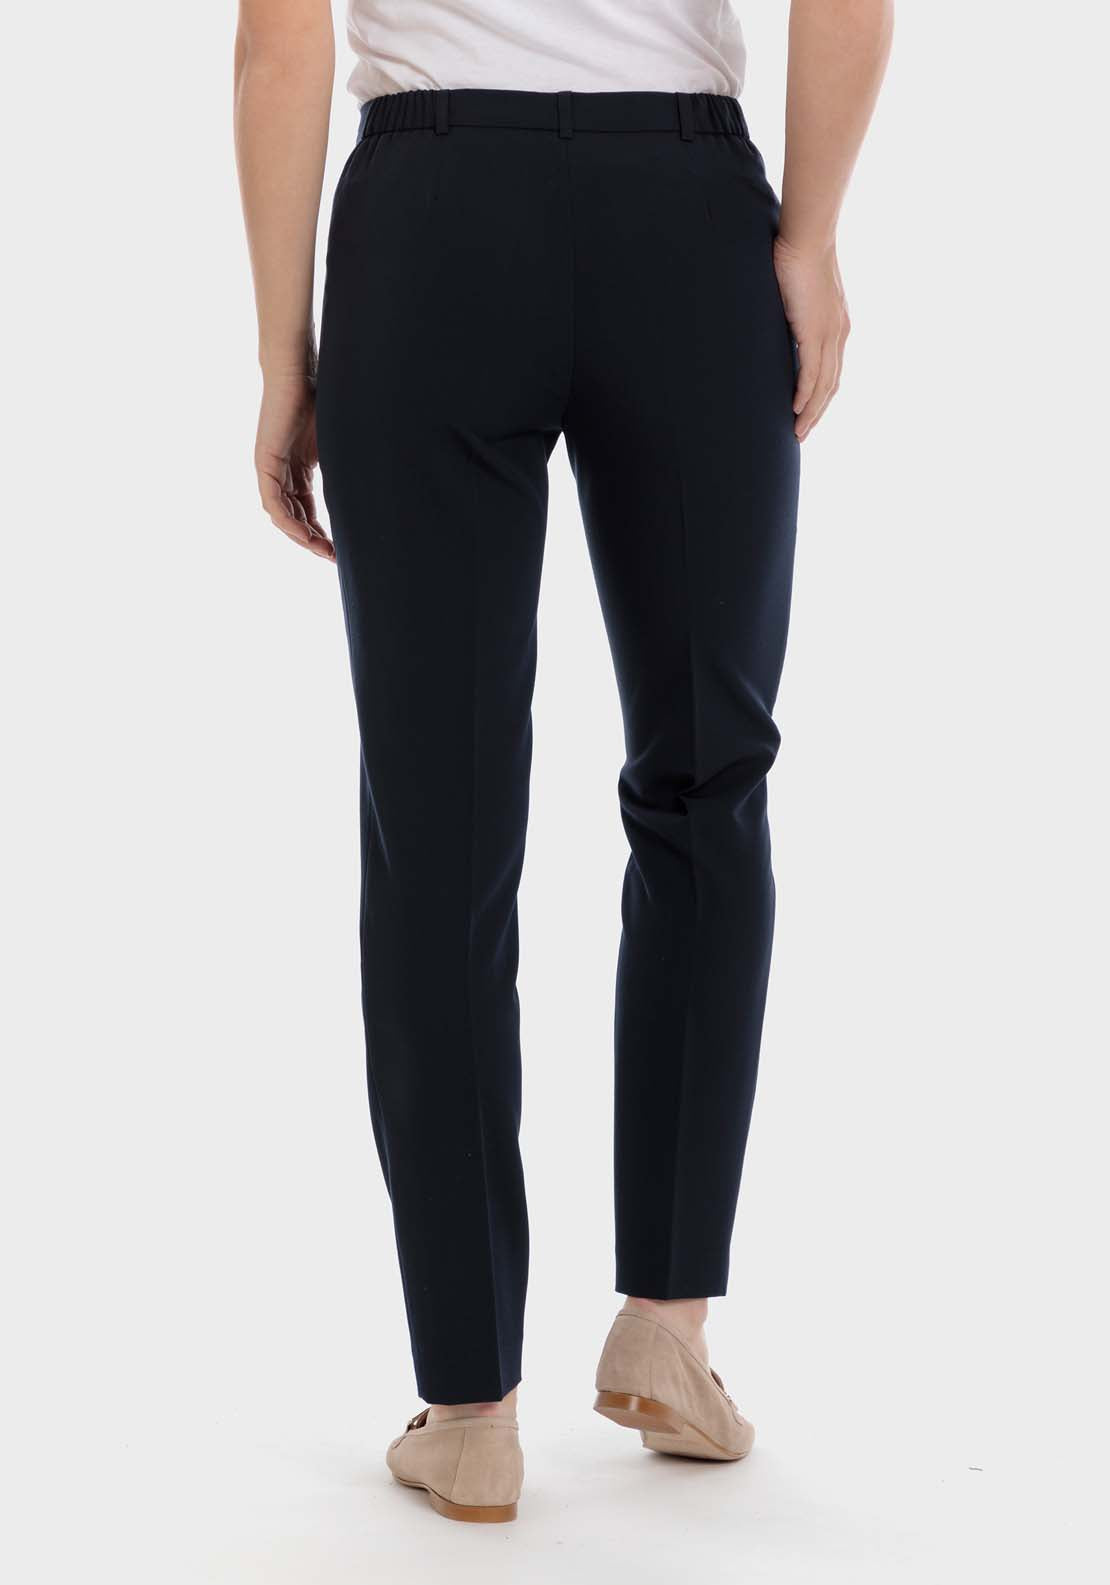 Punt Roma Viscose Trousers - Navy 2 Shaws Department Stores